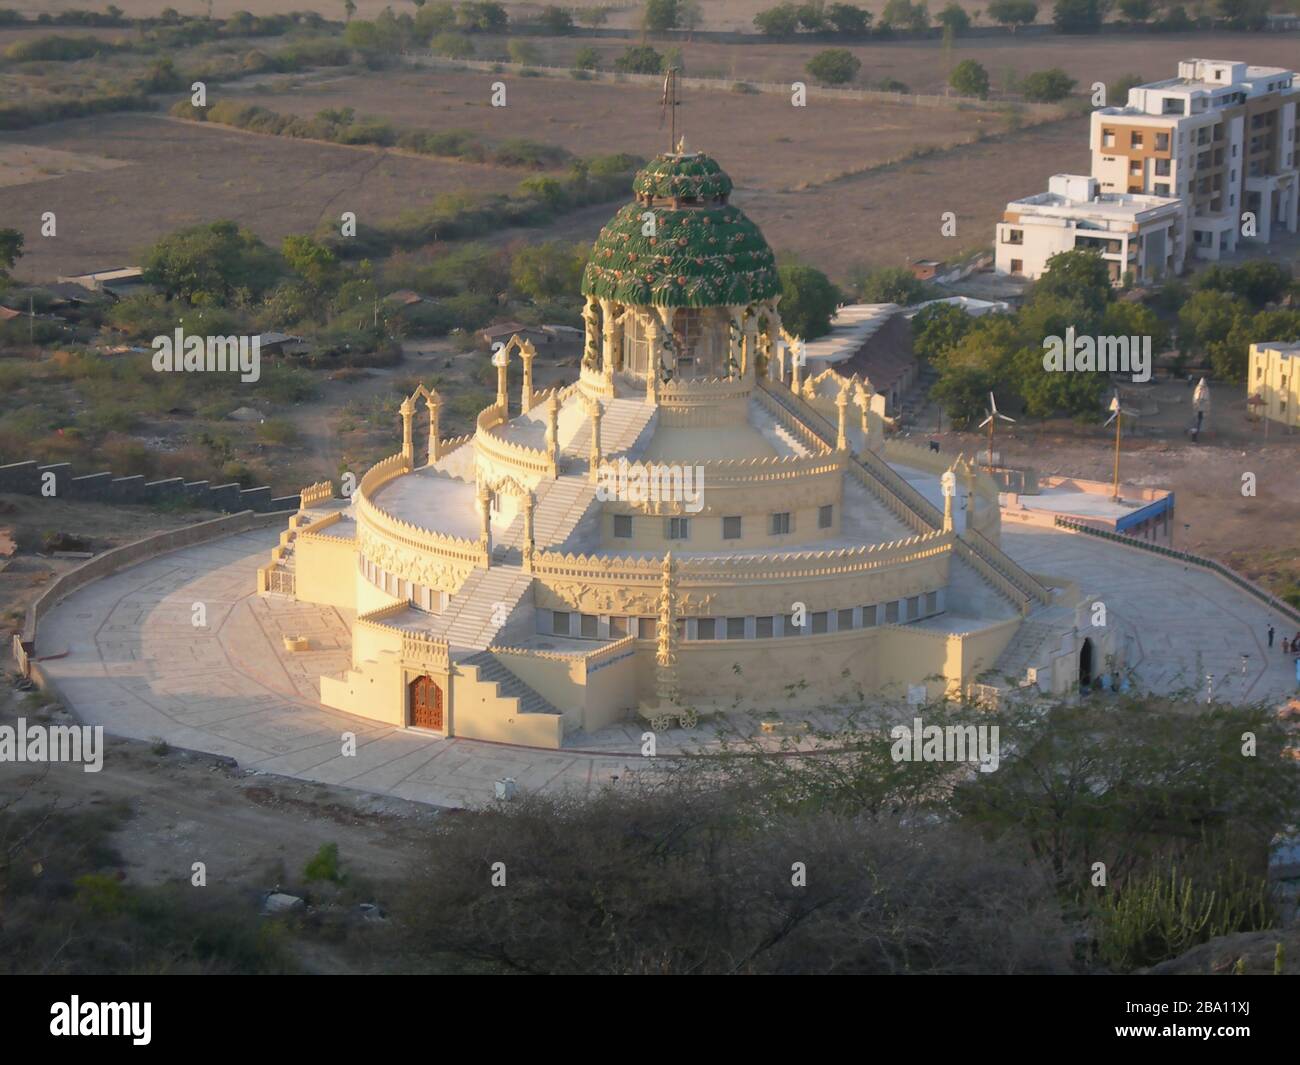 Architecture of the Temple The main temple of Samosaran has an iconic image of Jain Idol made up of a fine piece of marble. Stock Photo